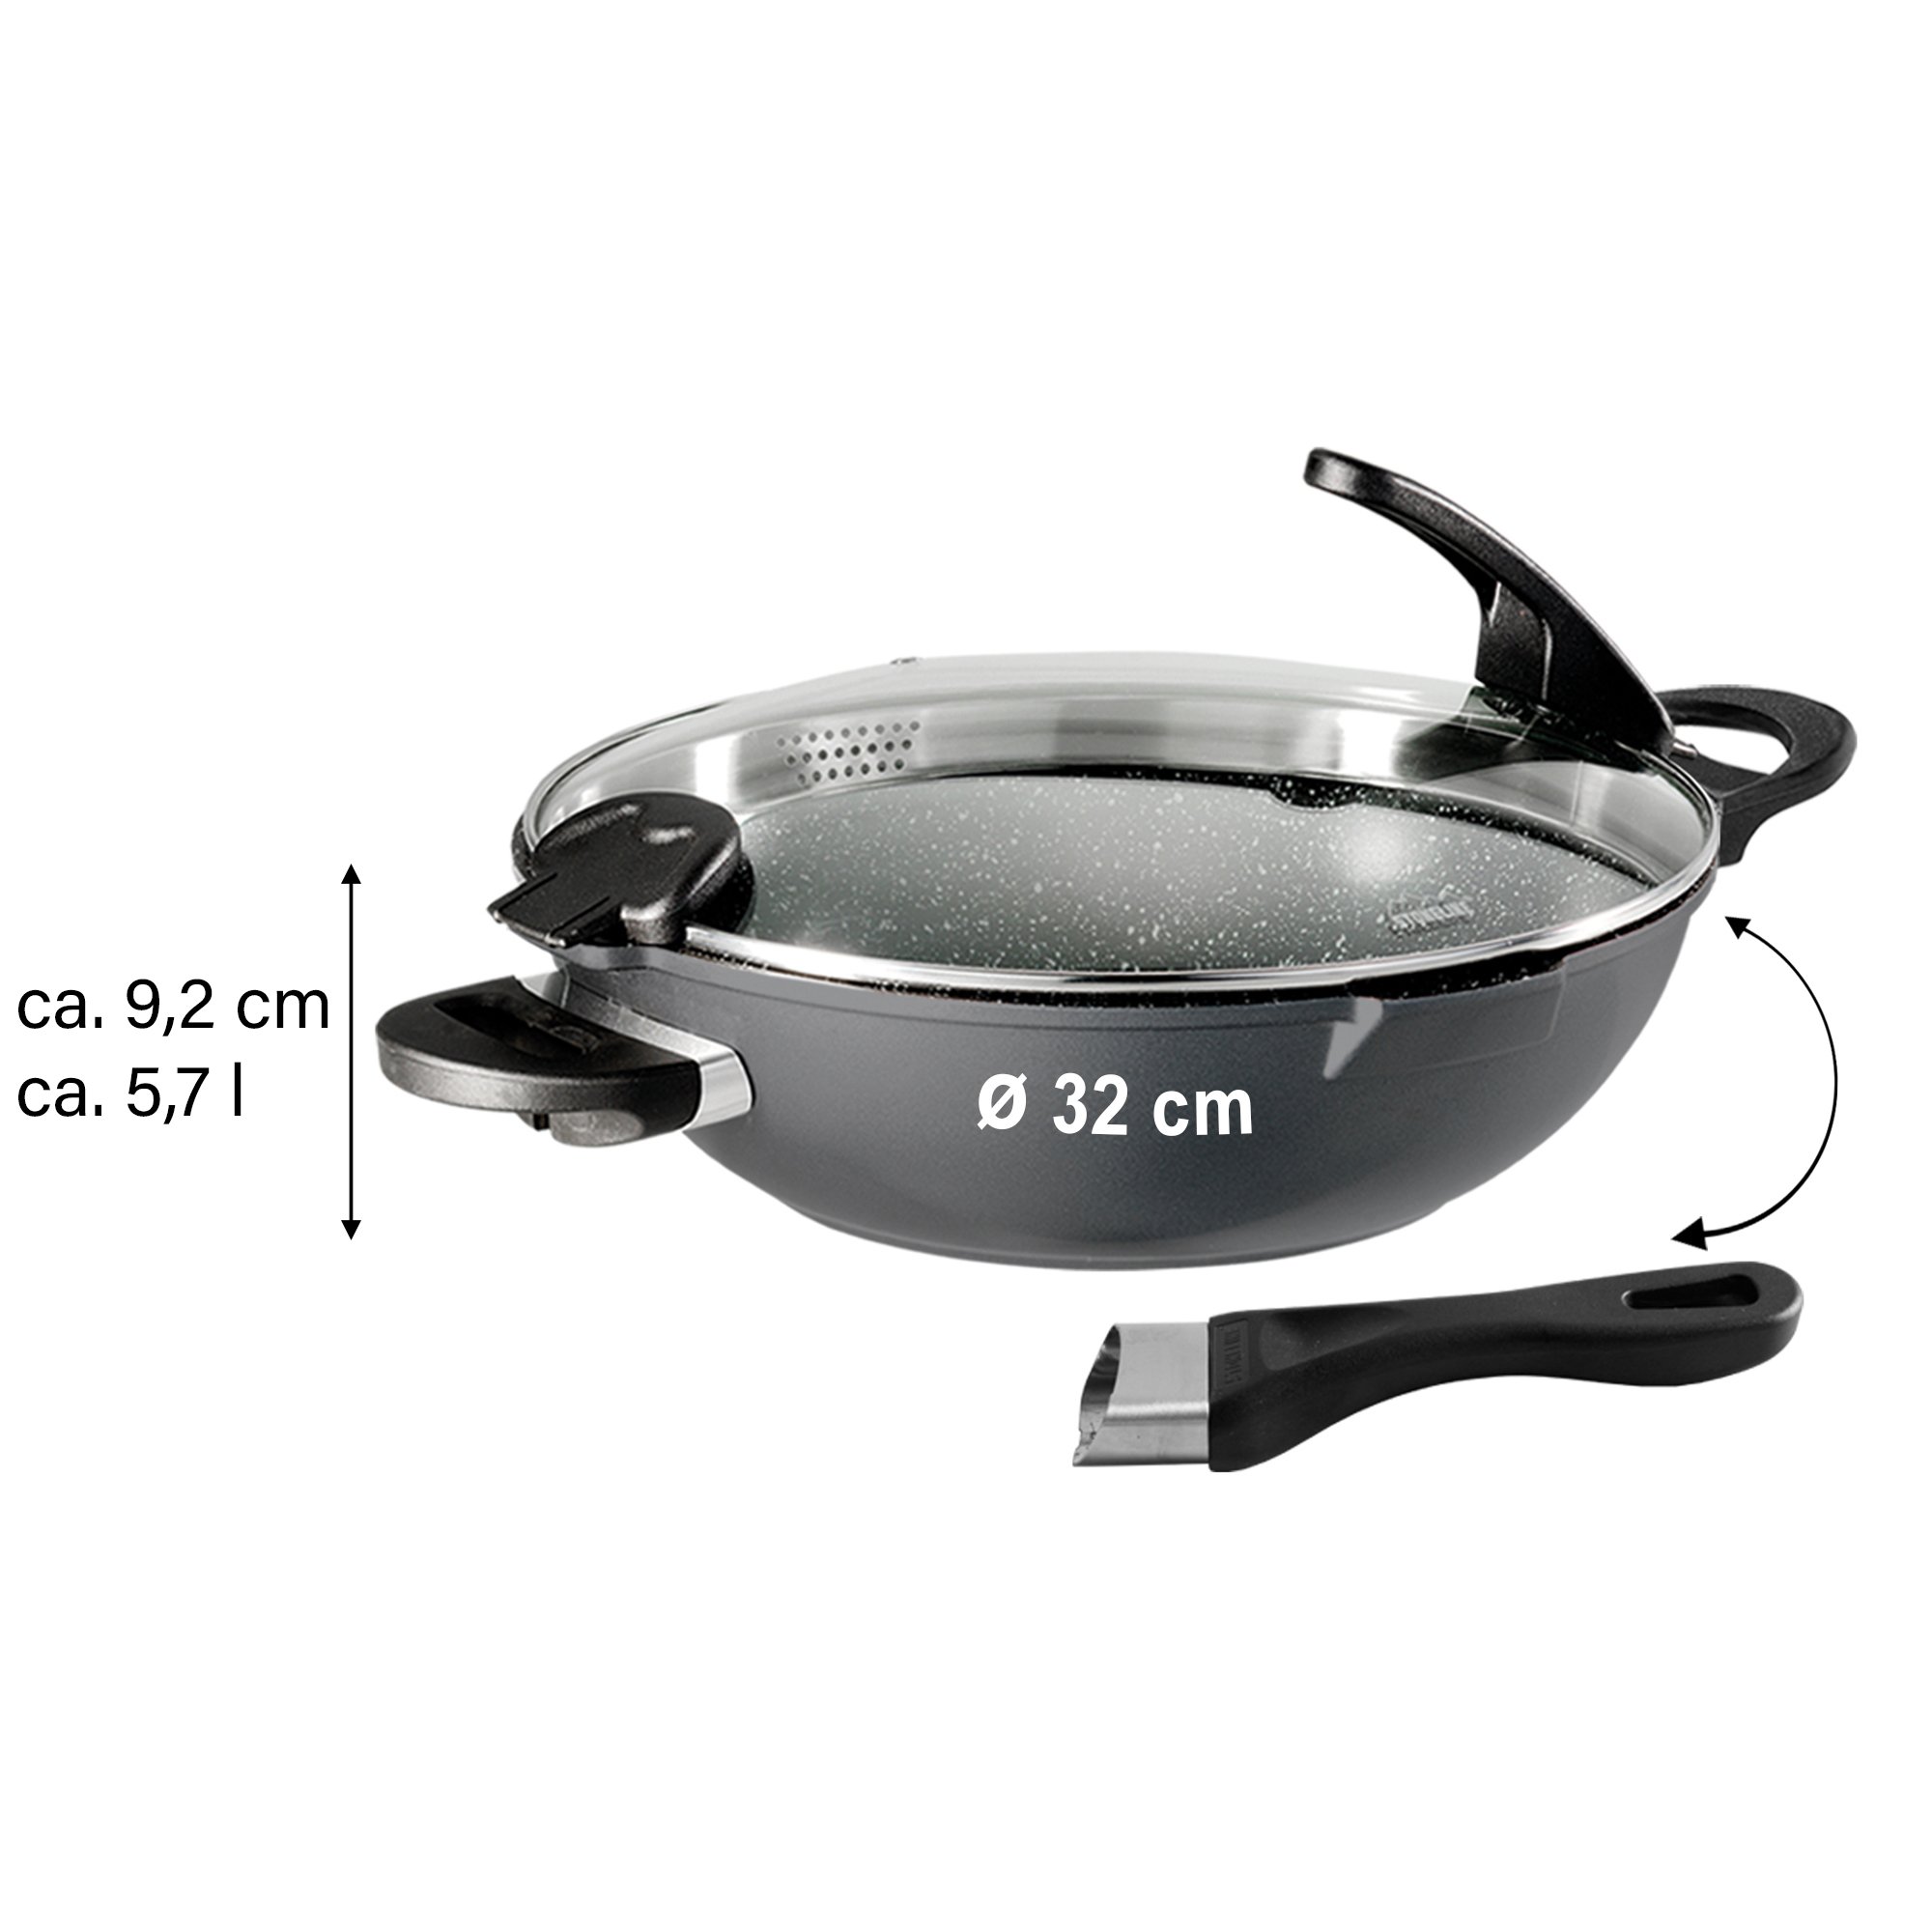 STONELINE® FUTURE wok pan 32 cm, interchangeable handles, with sieve glass lid, suitable for induction